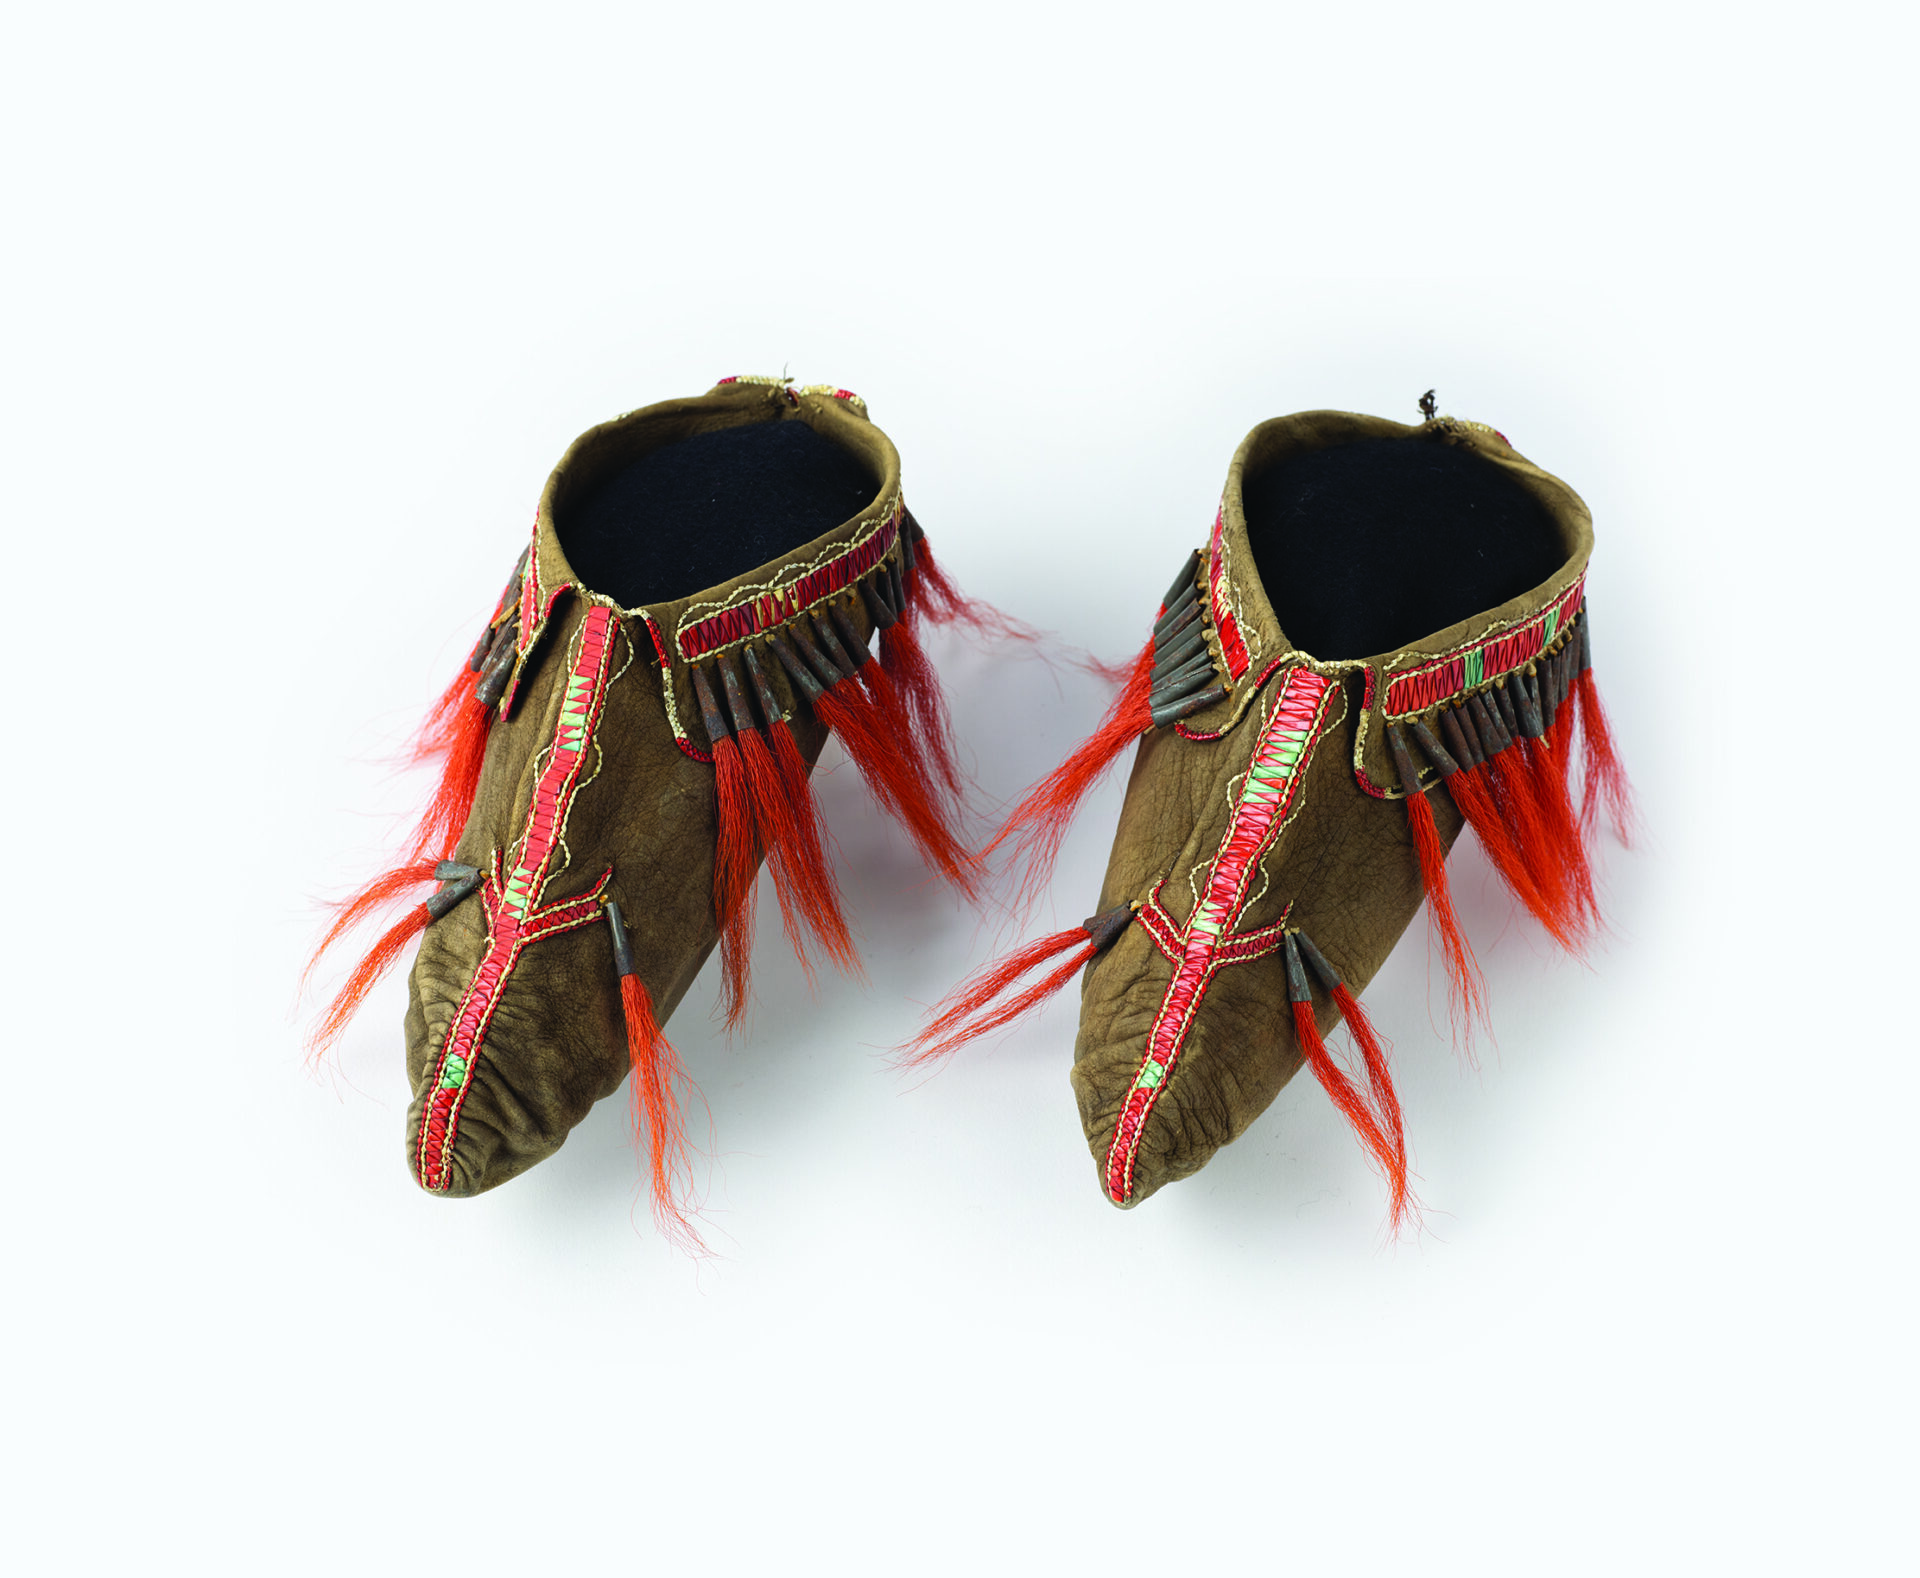 A pair of shoes with red and brown feathers.